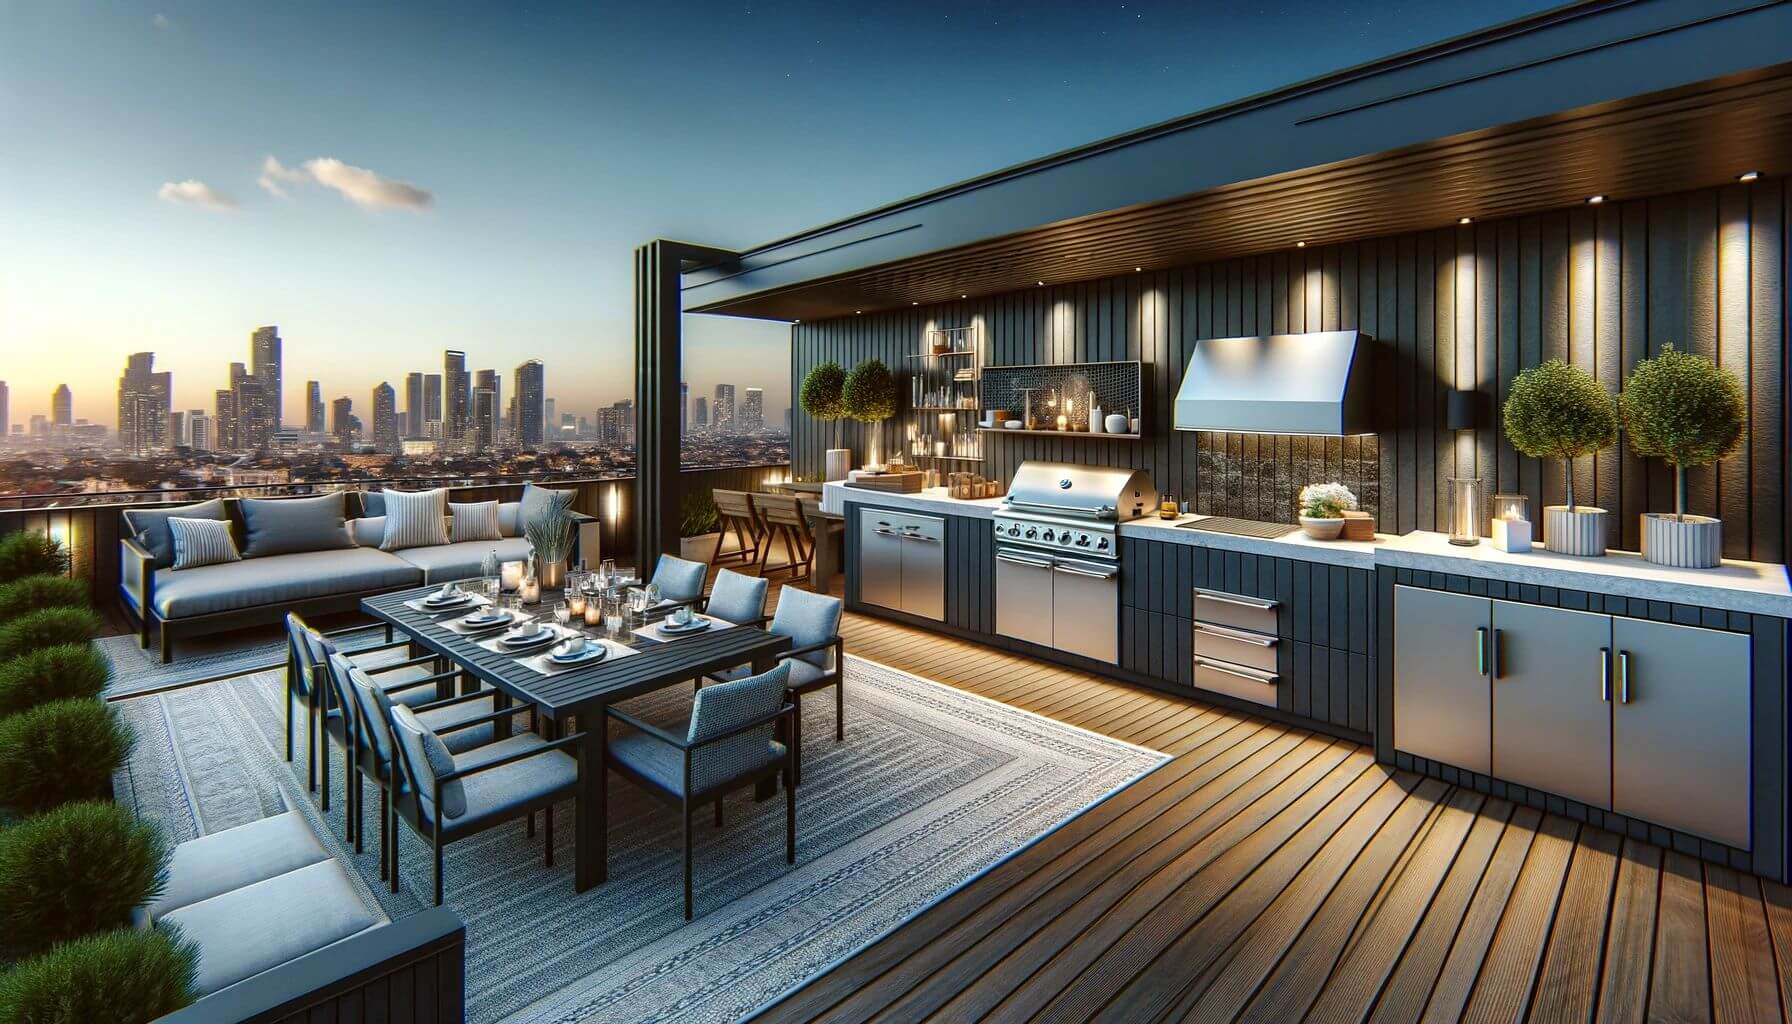 A sophisticated outdoor kitchen and dining area on a rooftop